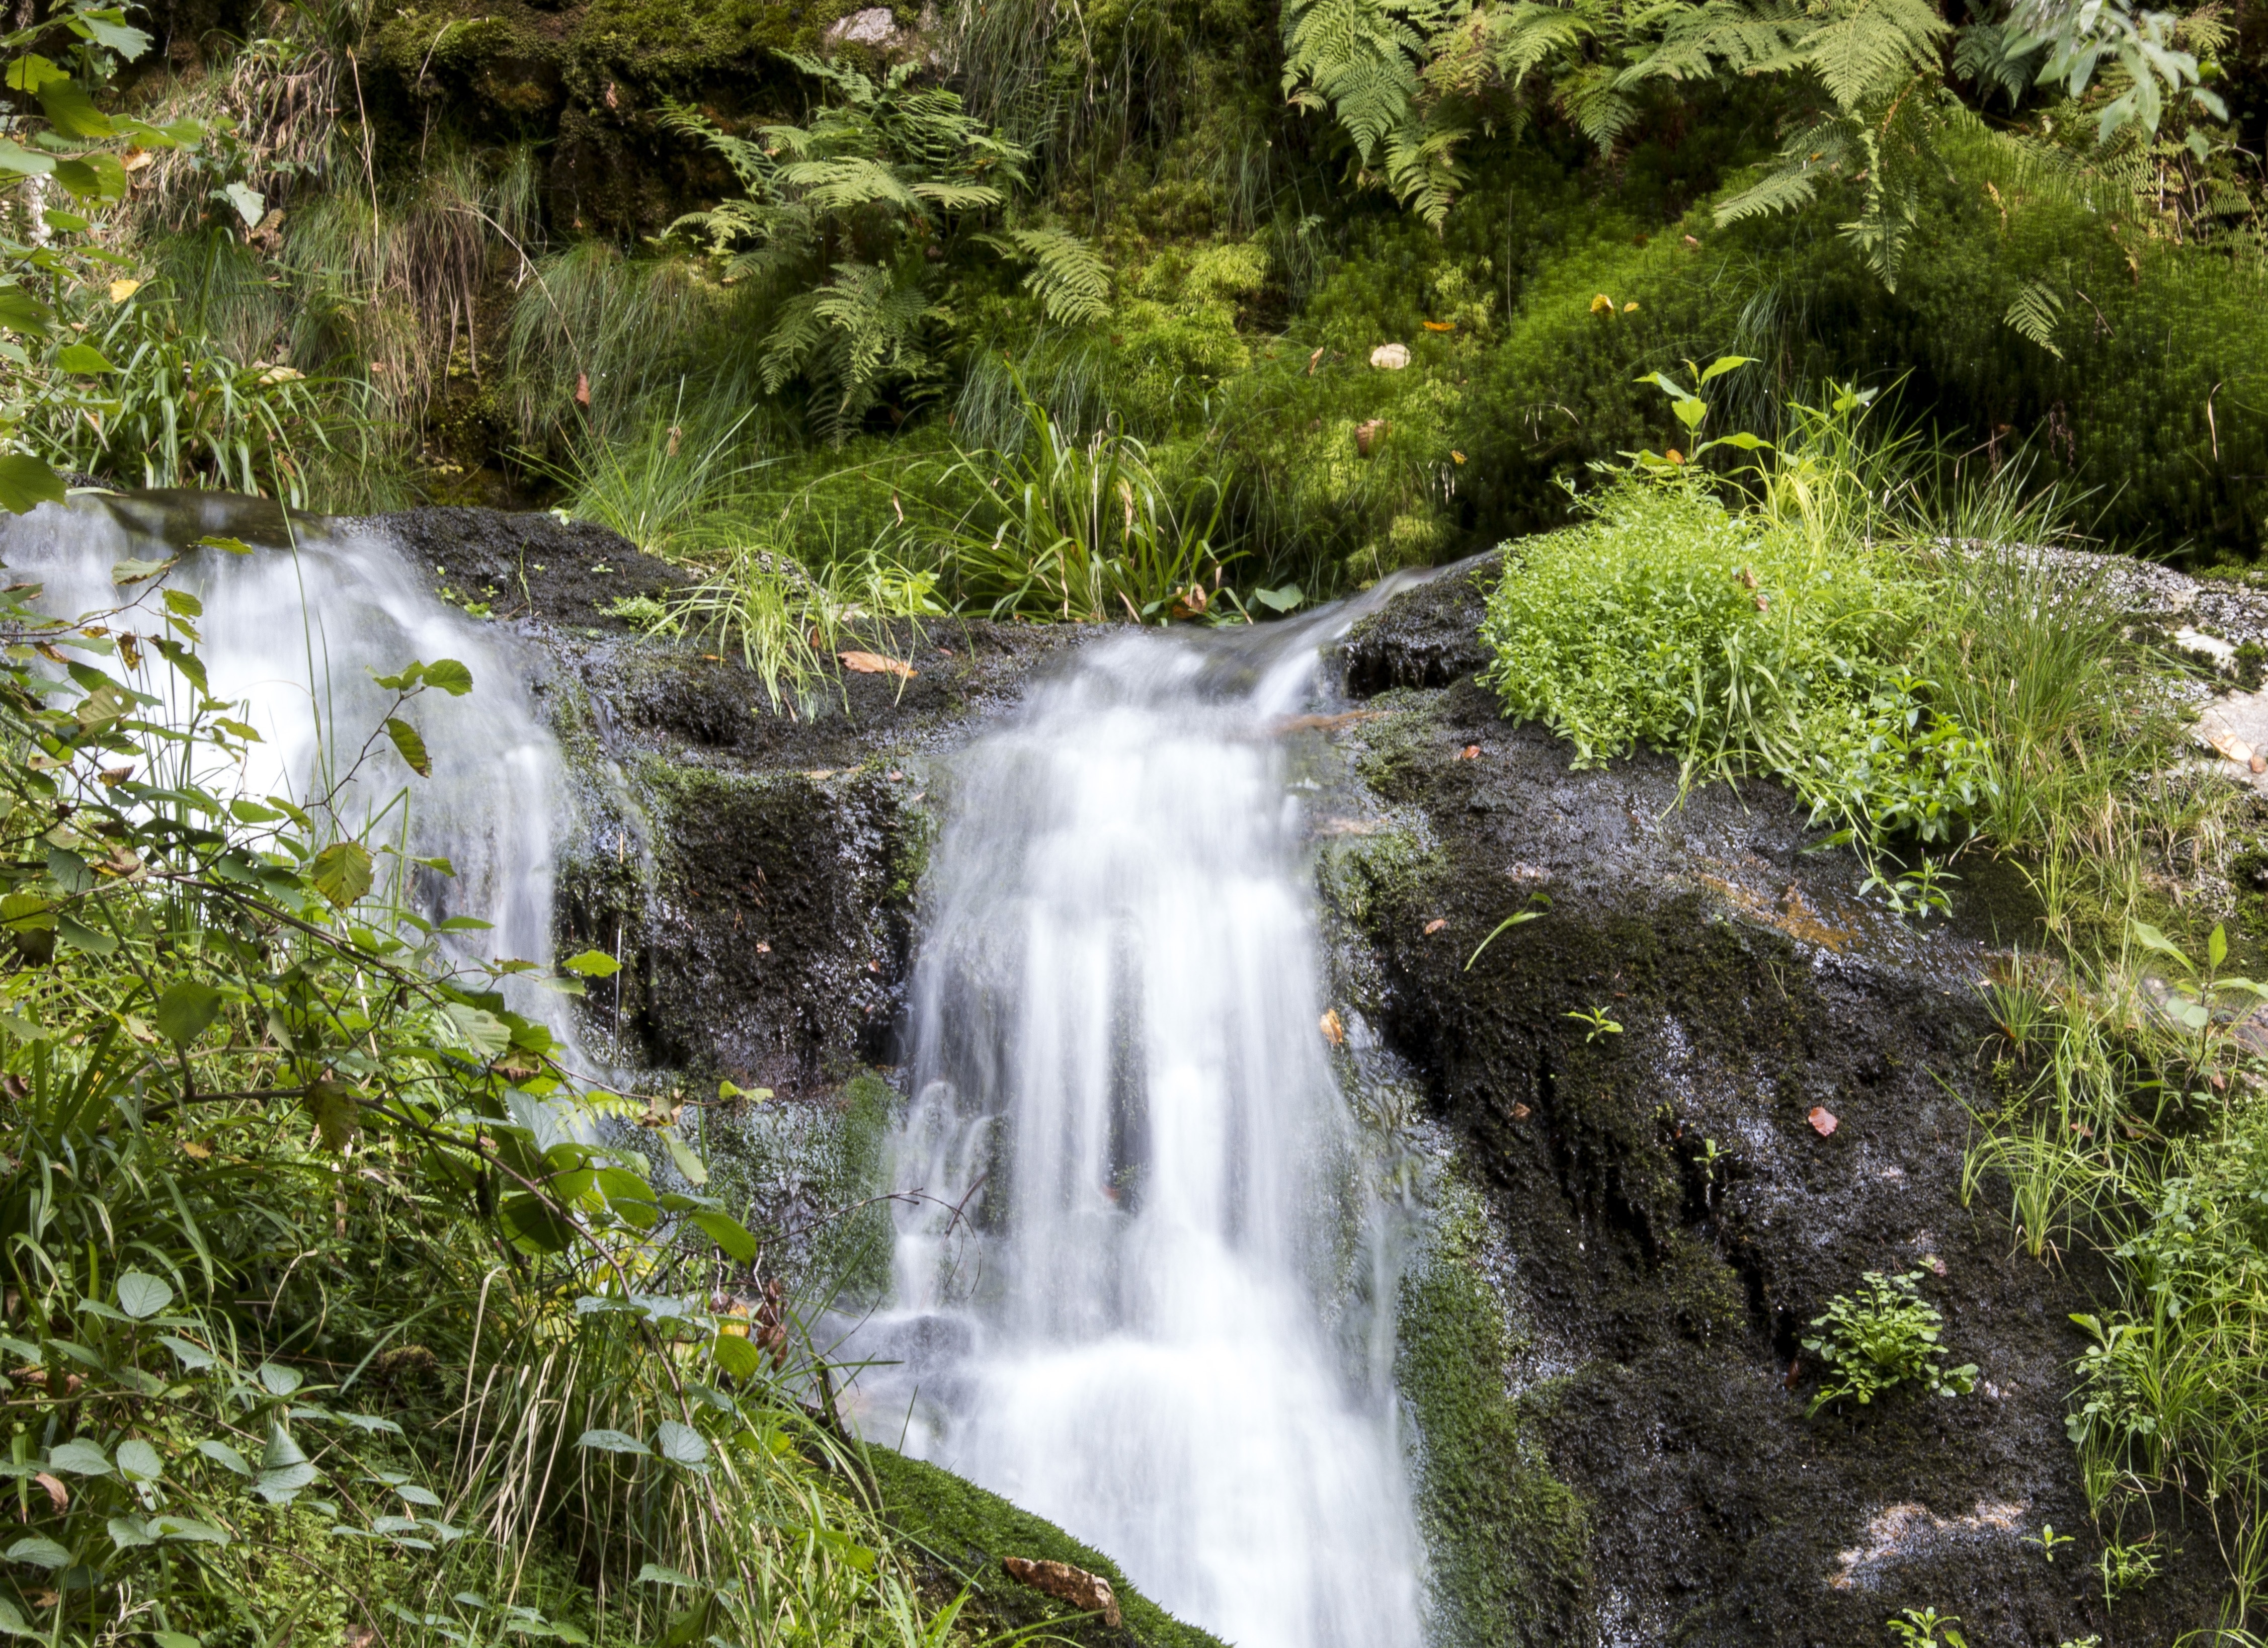 waterfalls surround by green leave trees and plants